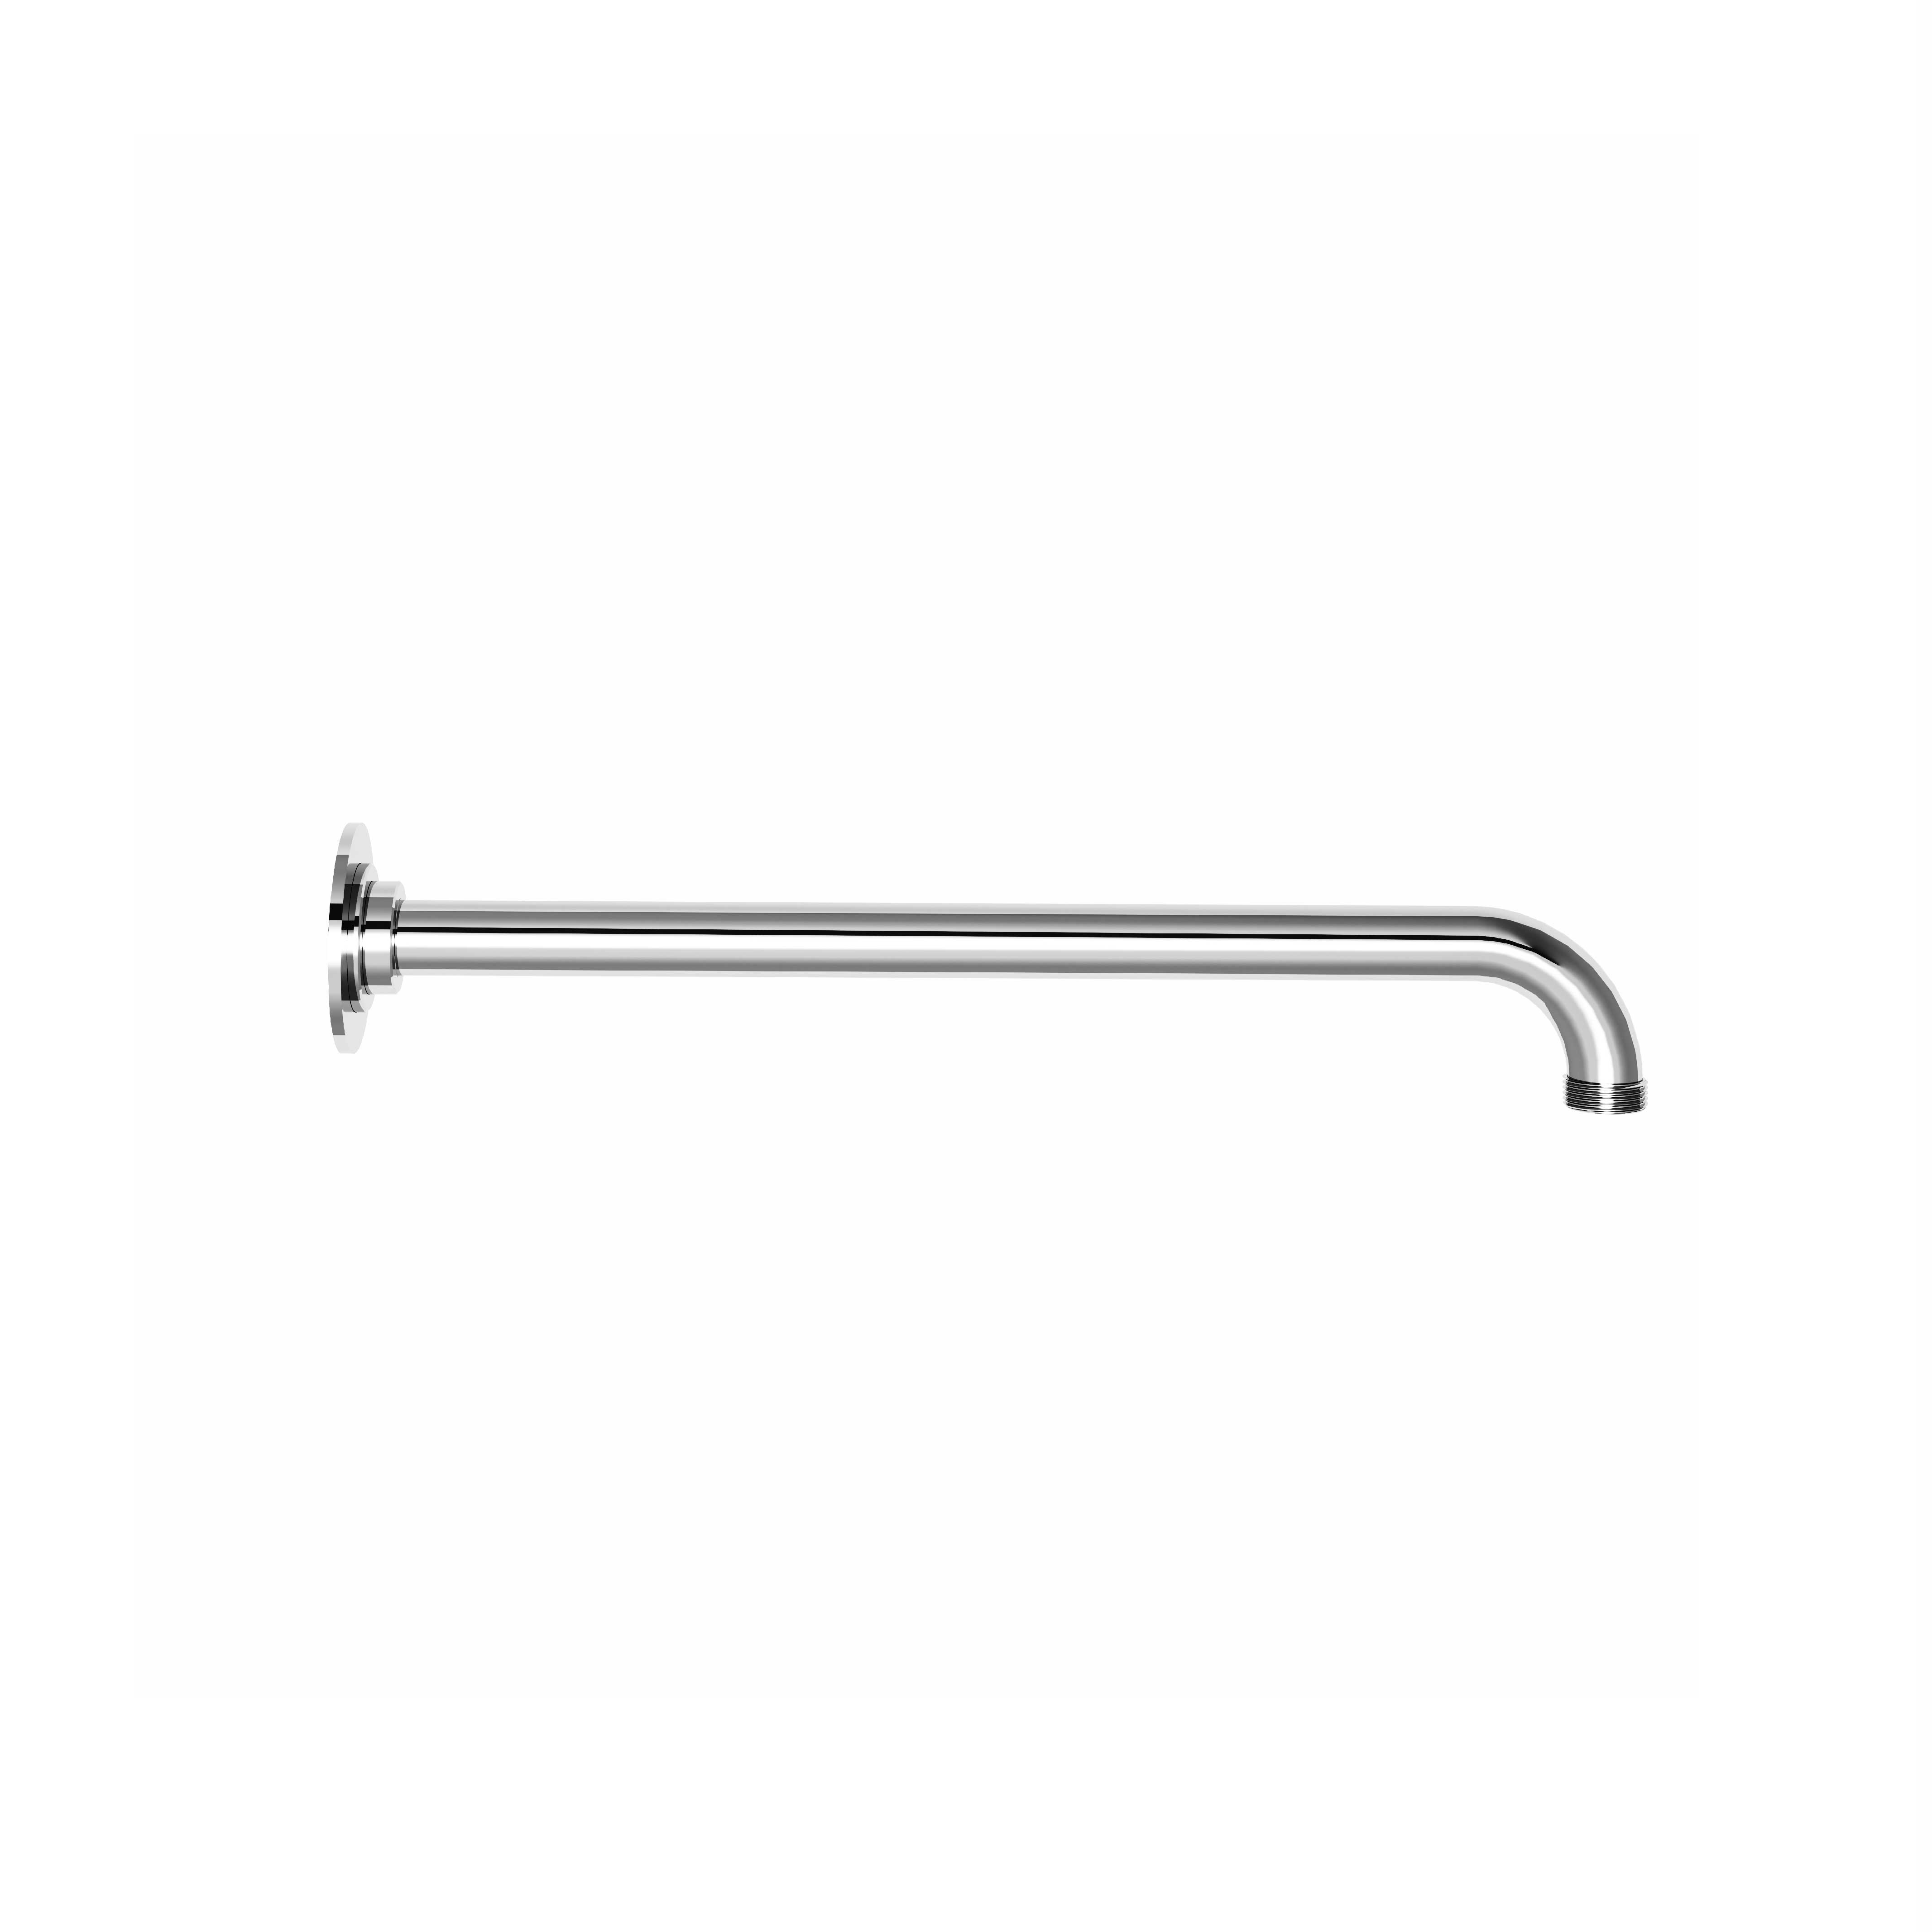 M30-2W301 Wall mounted shower arm 300mm